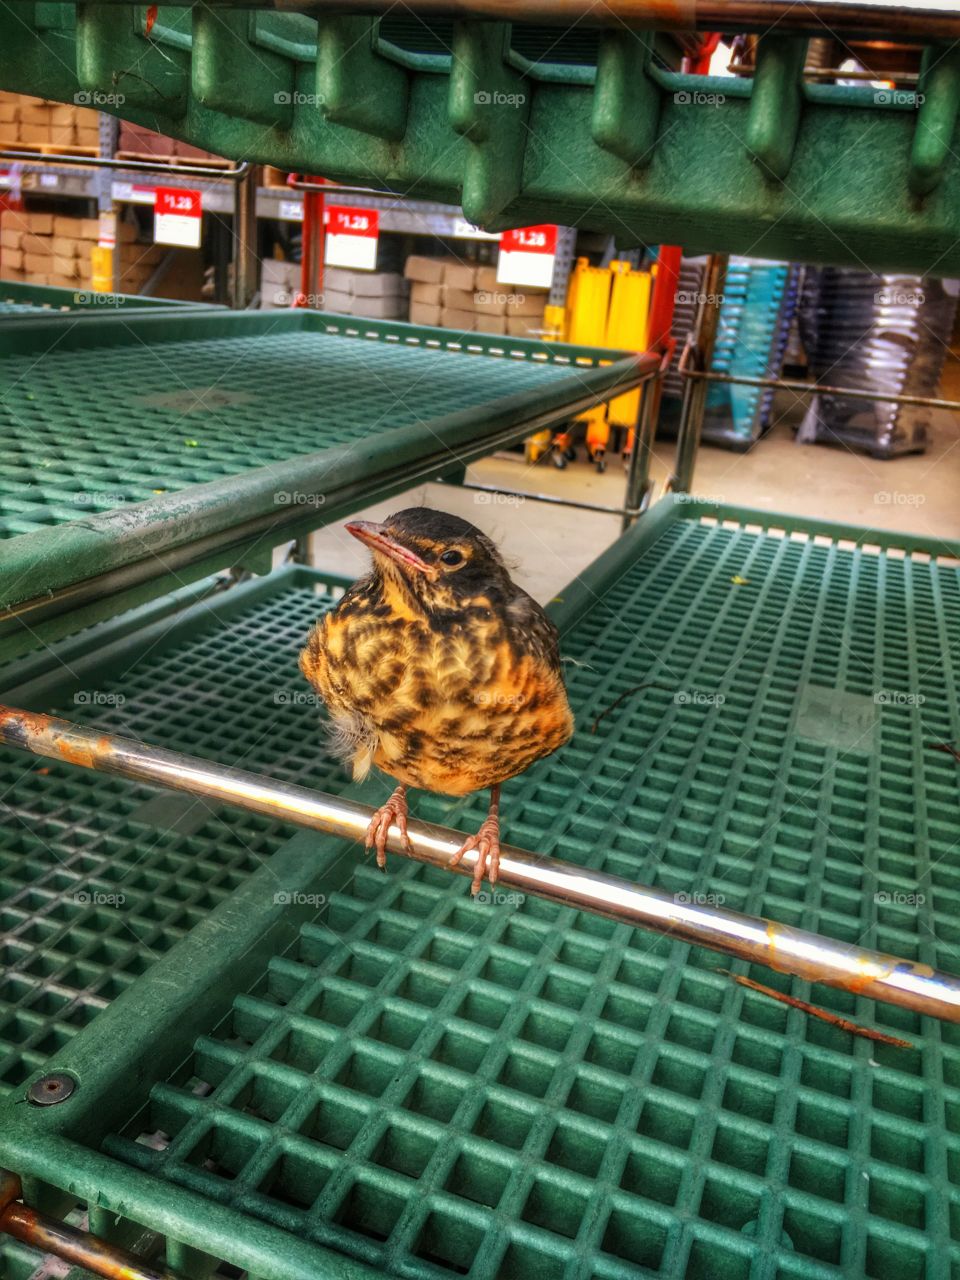 A Bird at Lowe’s